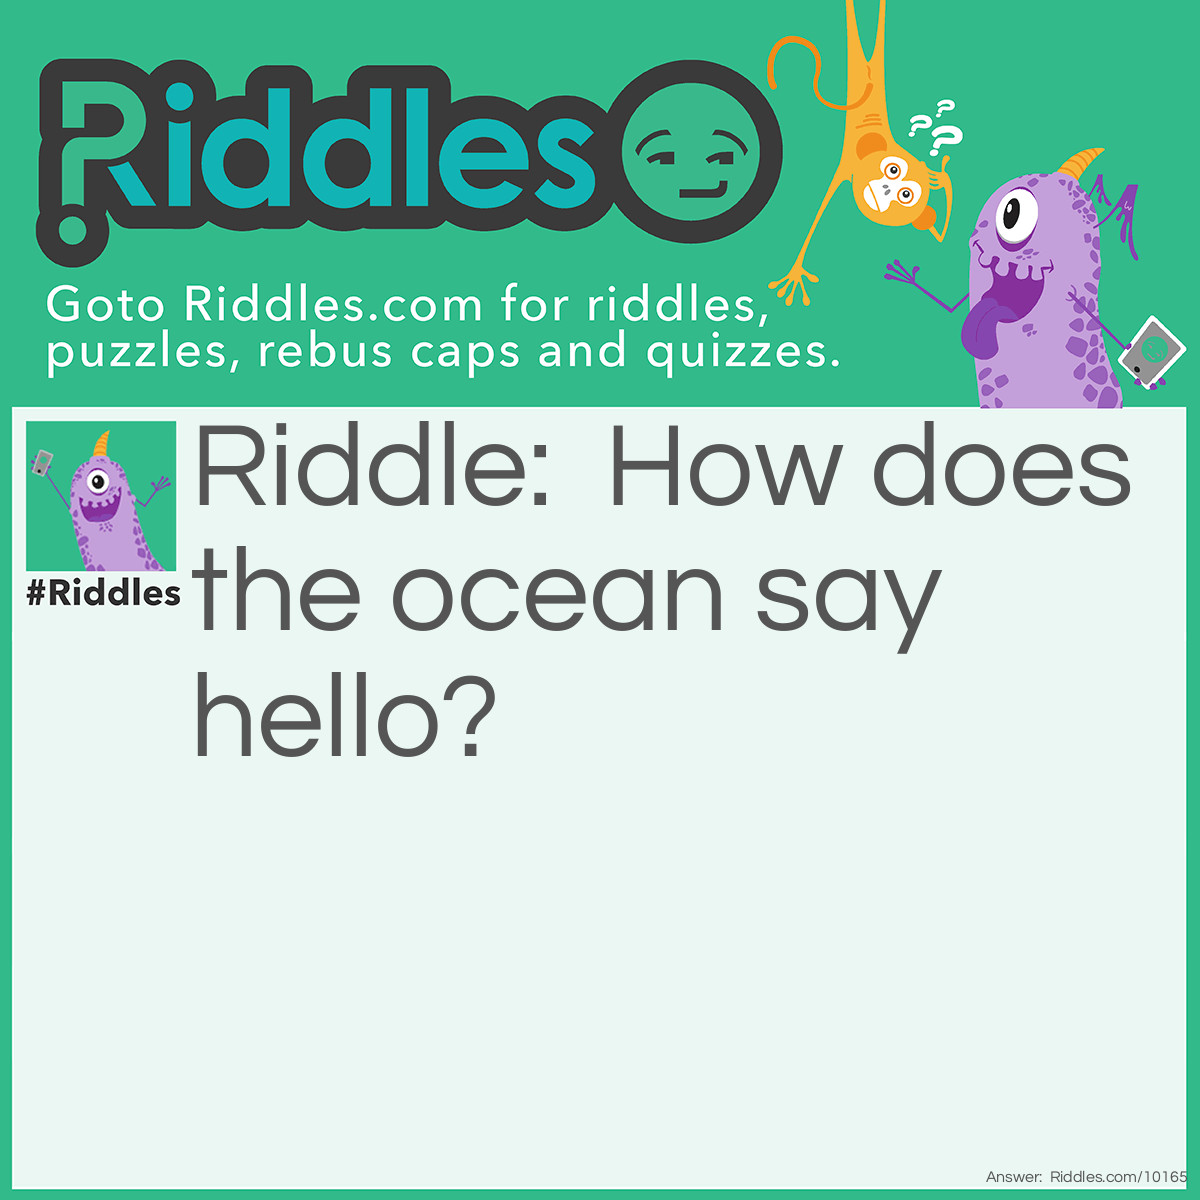 Riddle: How does the ocean say hello? Answer: It waves.